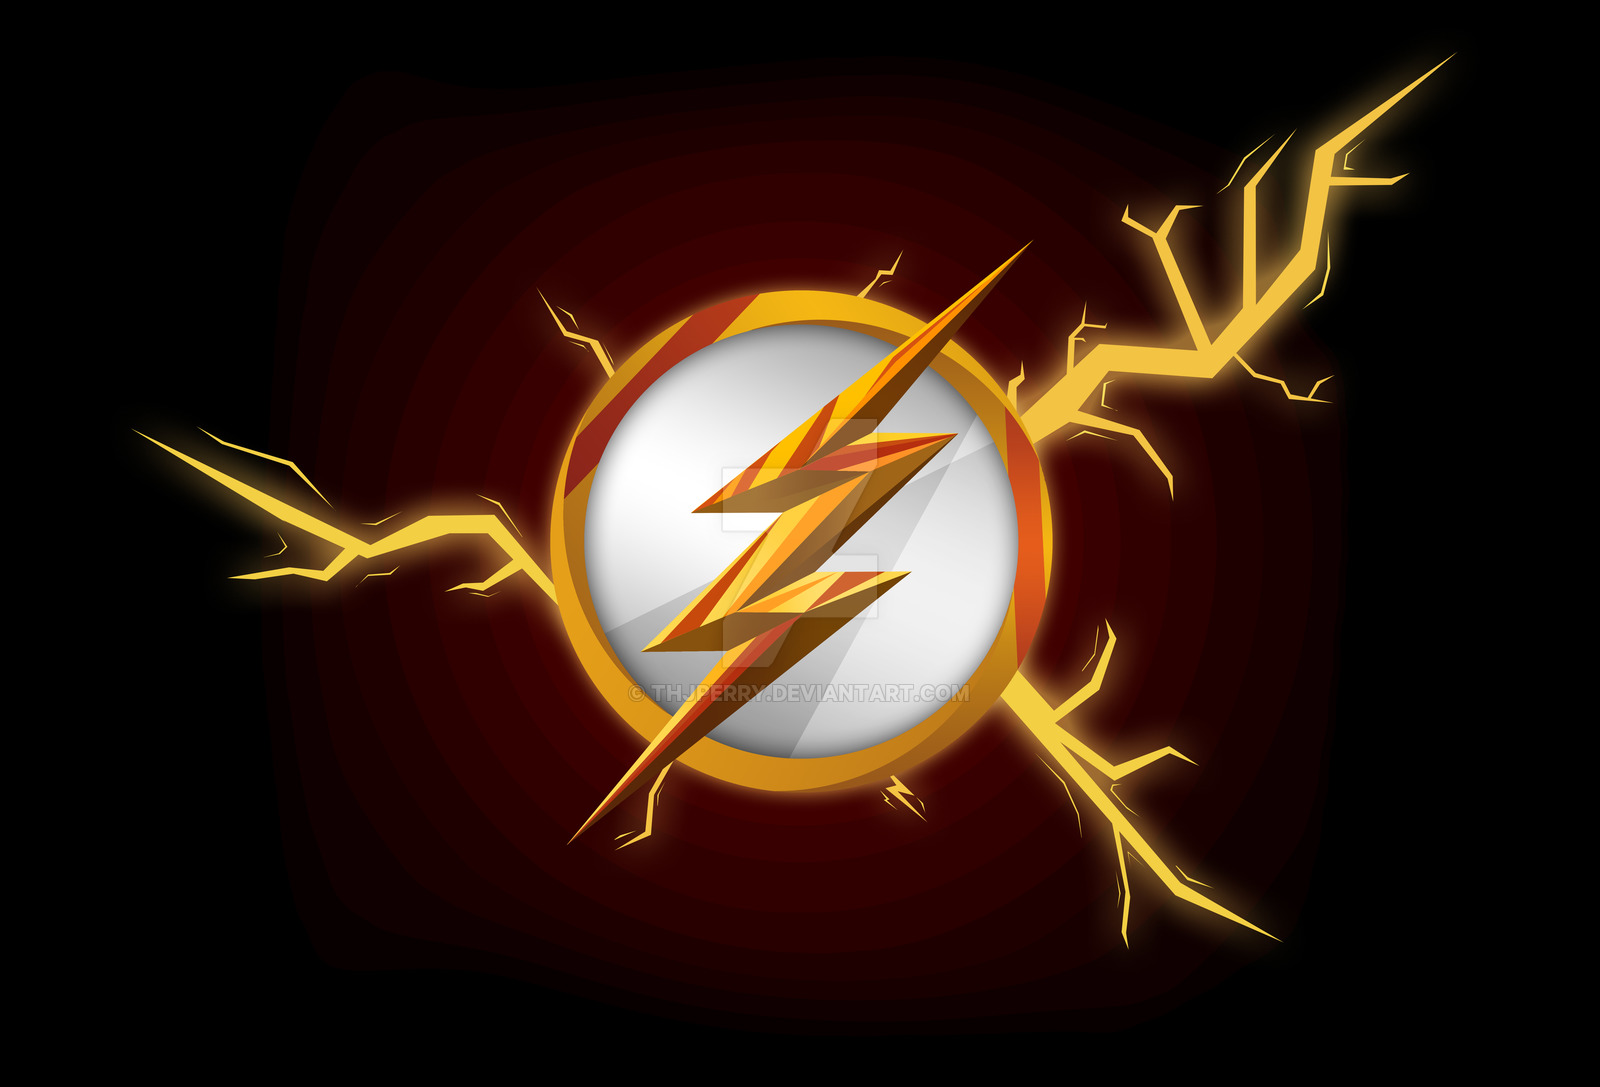 The Flash Emblem Wallpaper By Thjperry